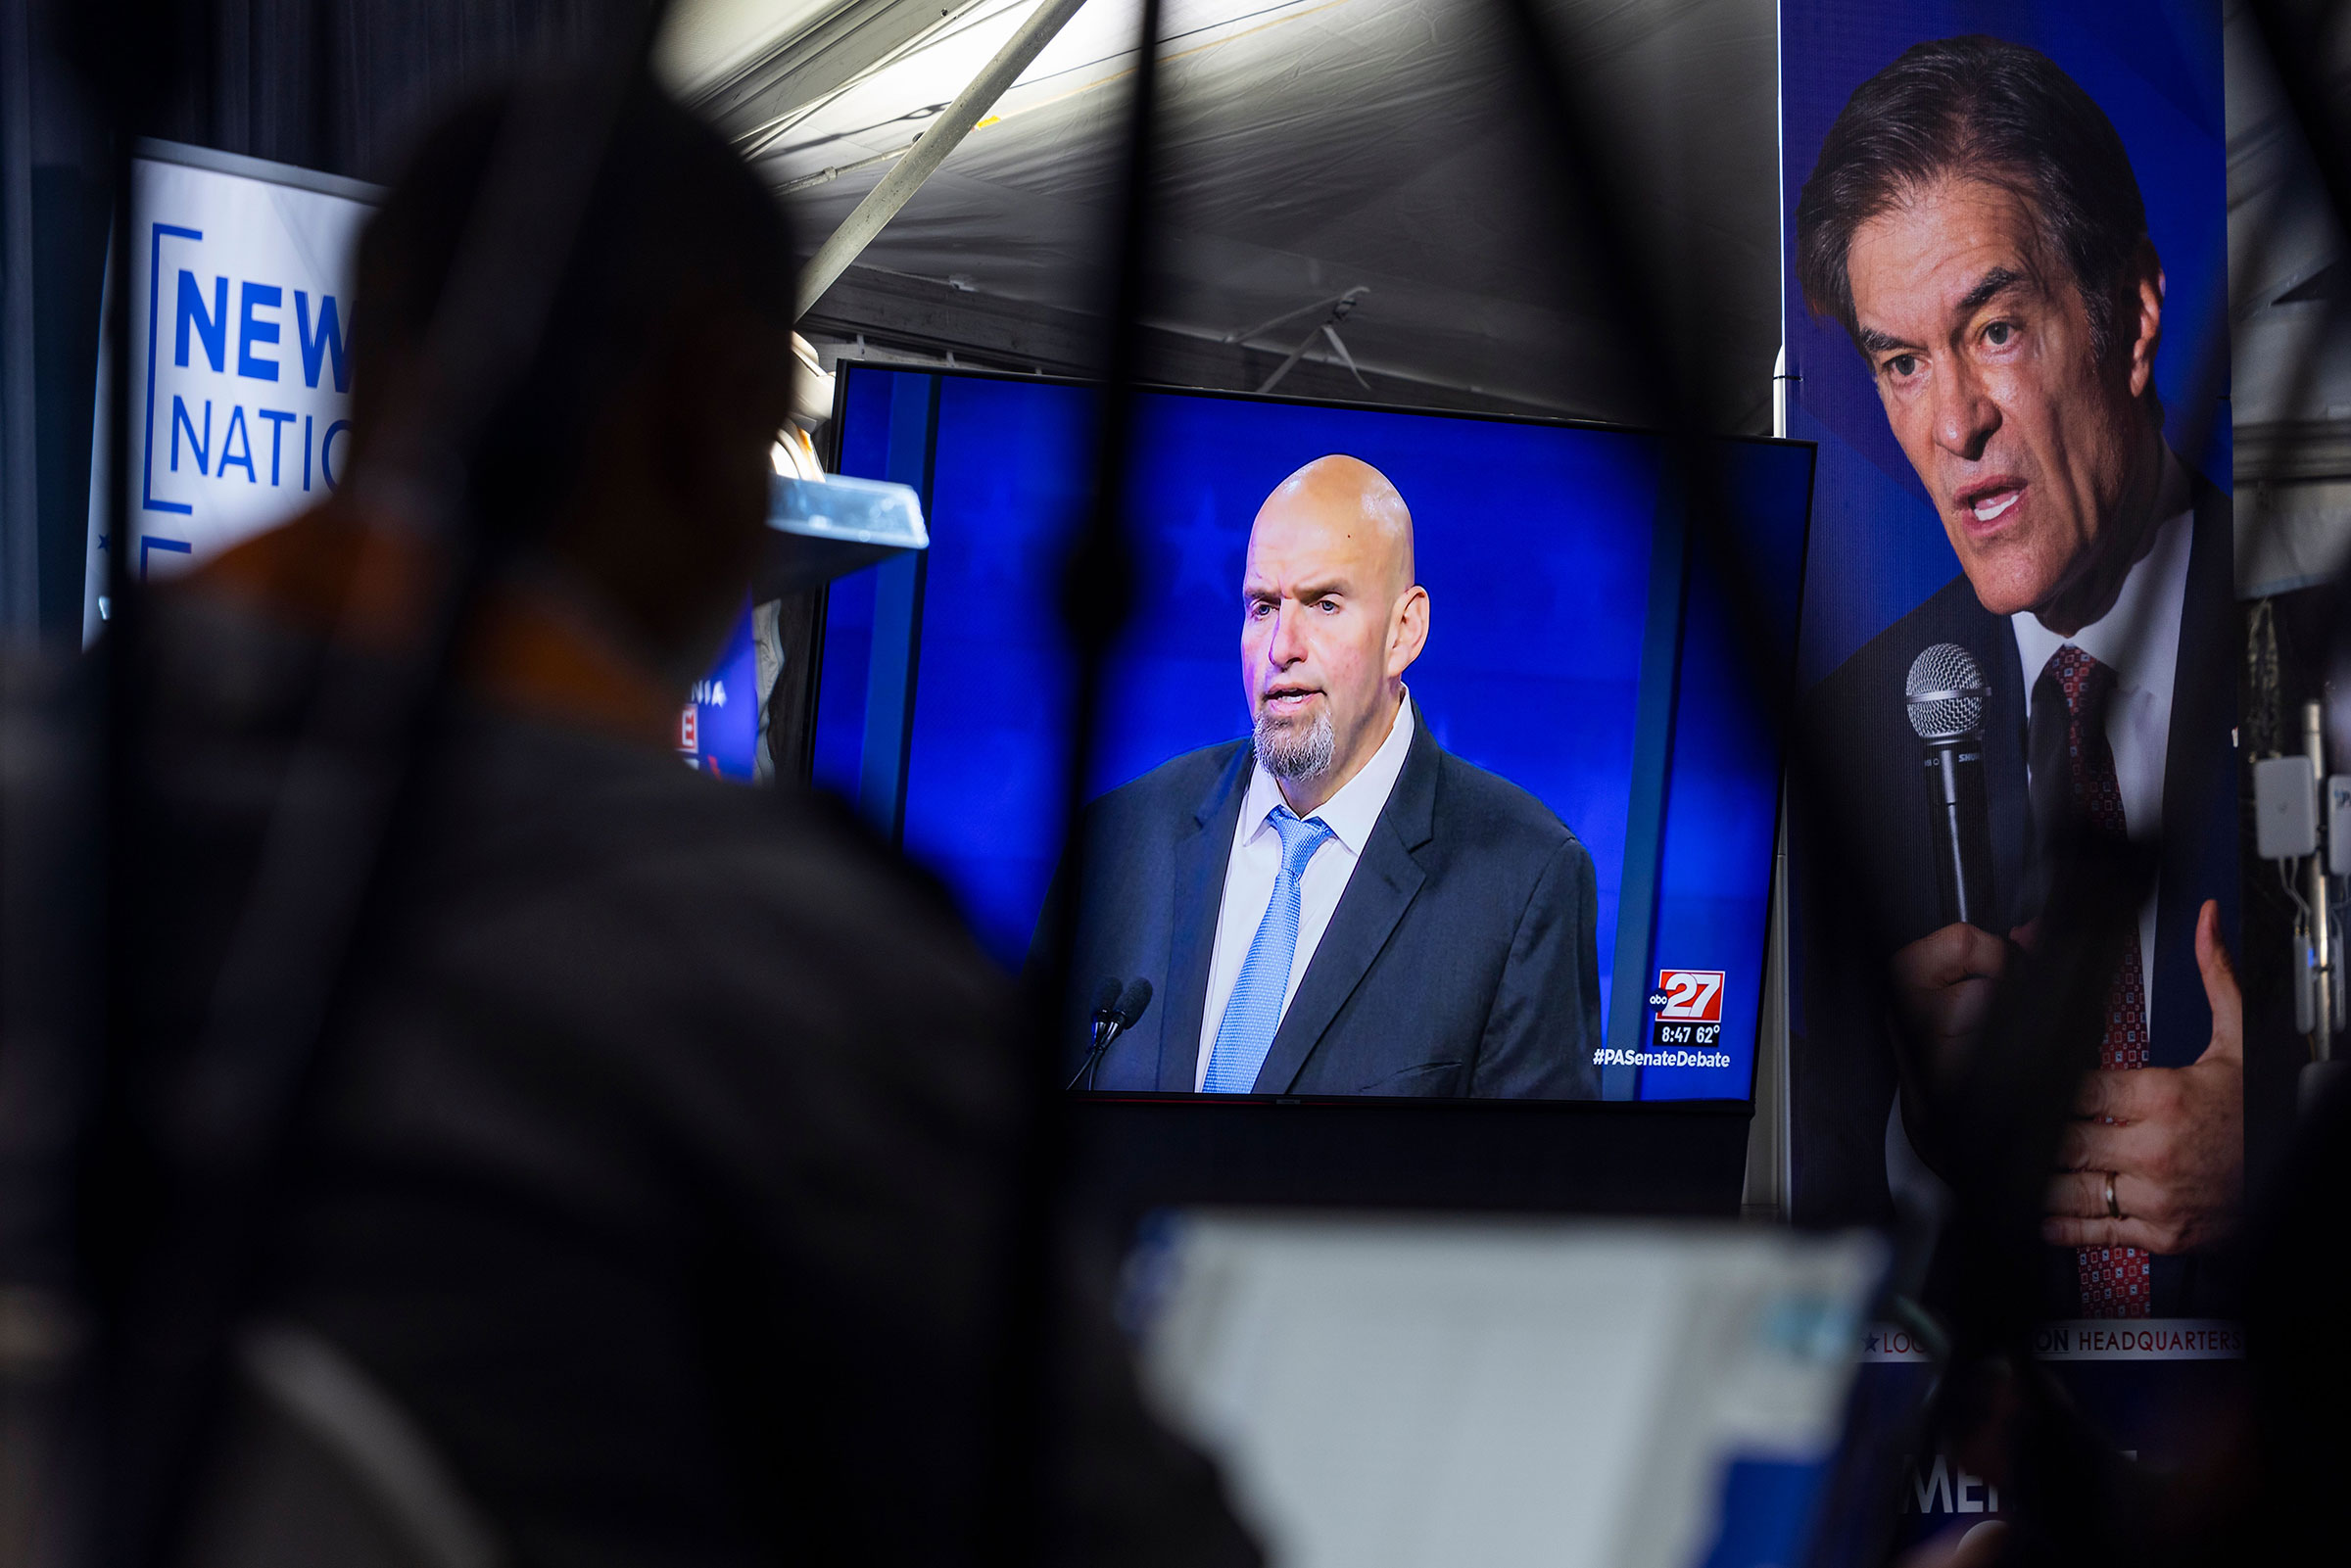 Members of the media watch John Fetterman face off against Mehmet Oz on a TV monitor during the candidates' only debate in Harrisburg, Pa., on Oct. 25. (Jim Lo Scalzo—EPA-EFE/Shutterstock)